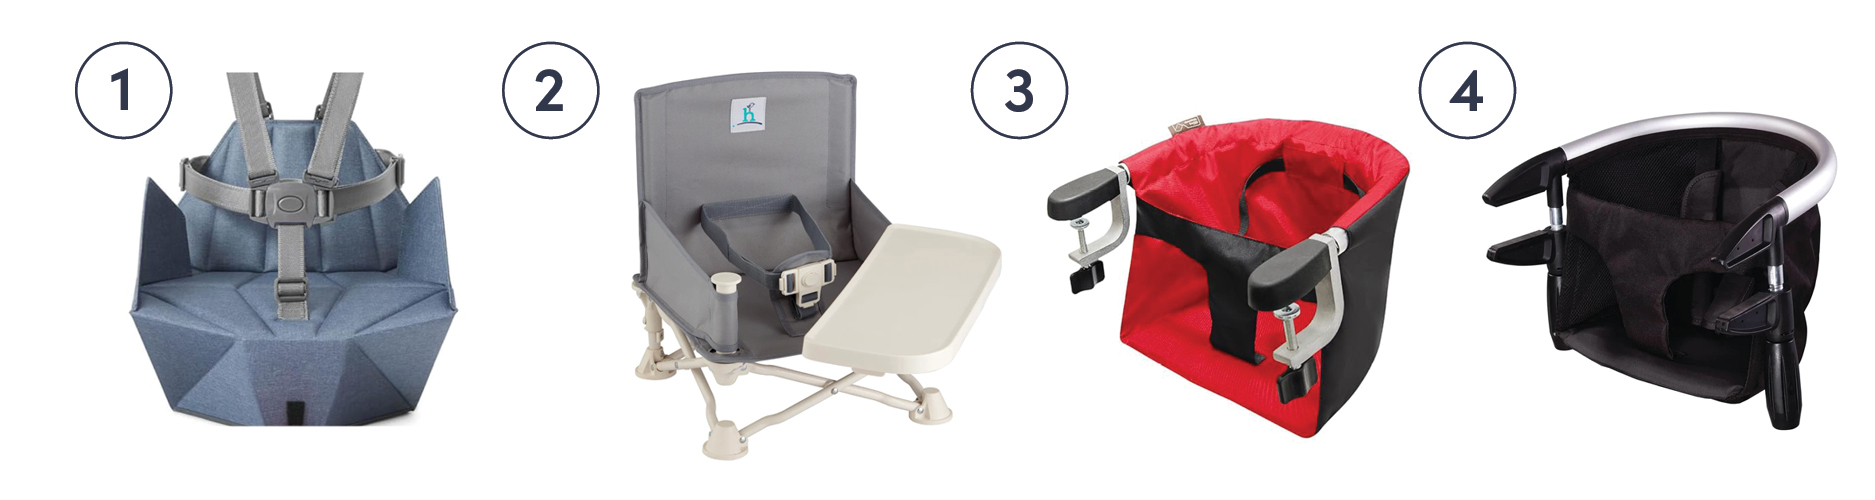 Ultimate Guide to High Chairs for Babies - Solid Starts